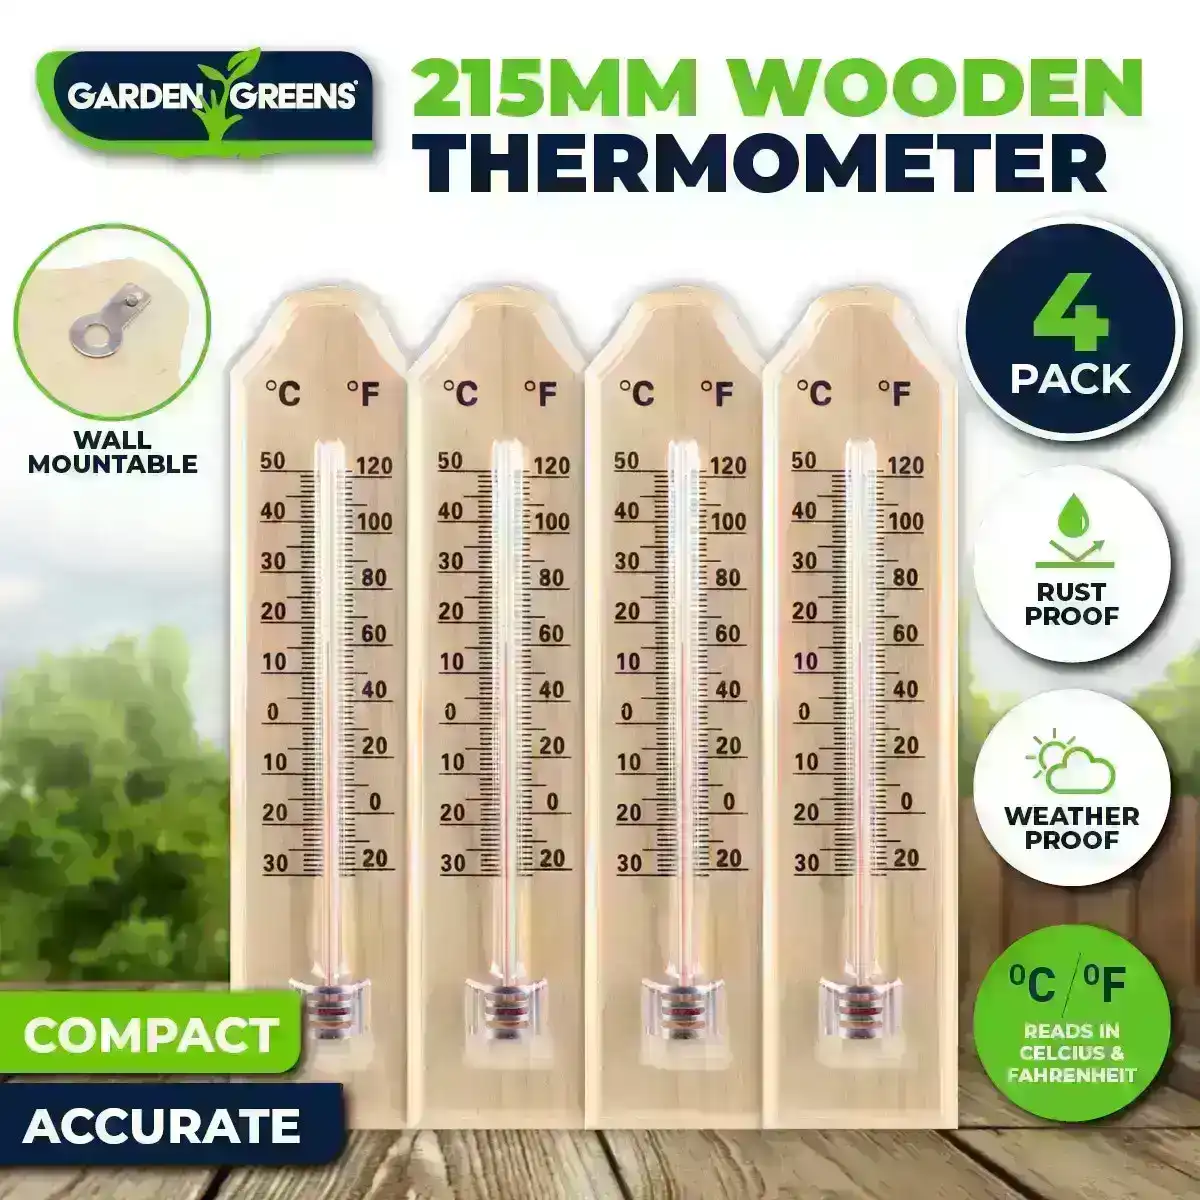 Garden Greens® 4PK Thermometer Wooden Accurate Weatherproof 21.5 x 4.5cm